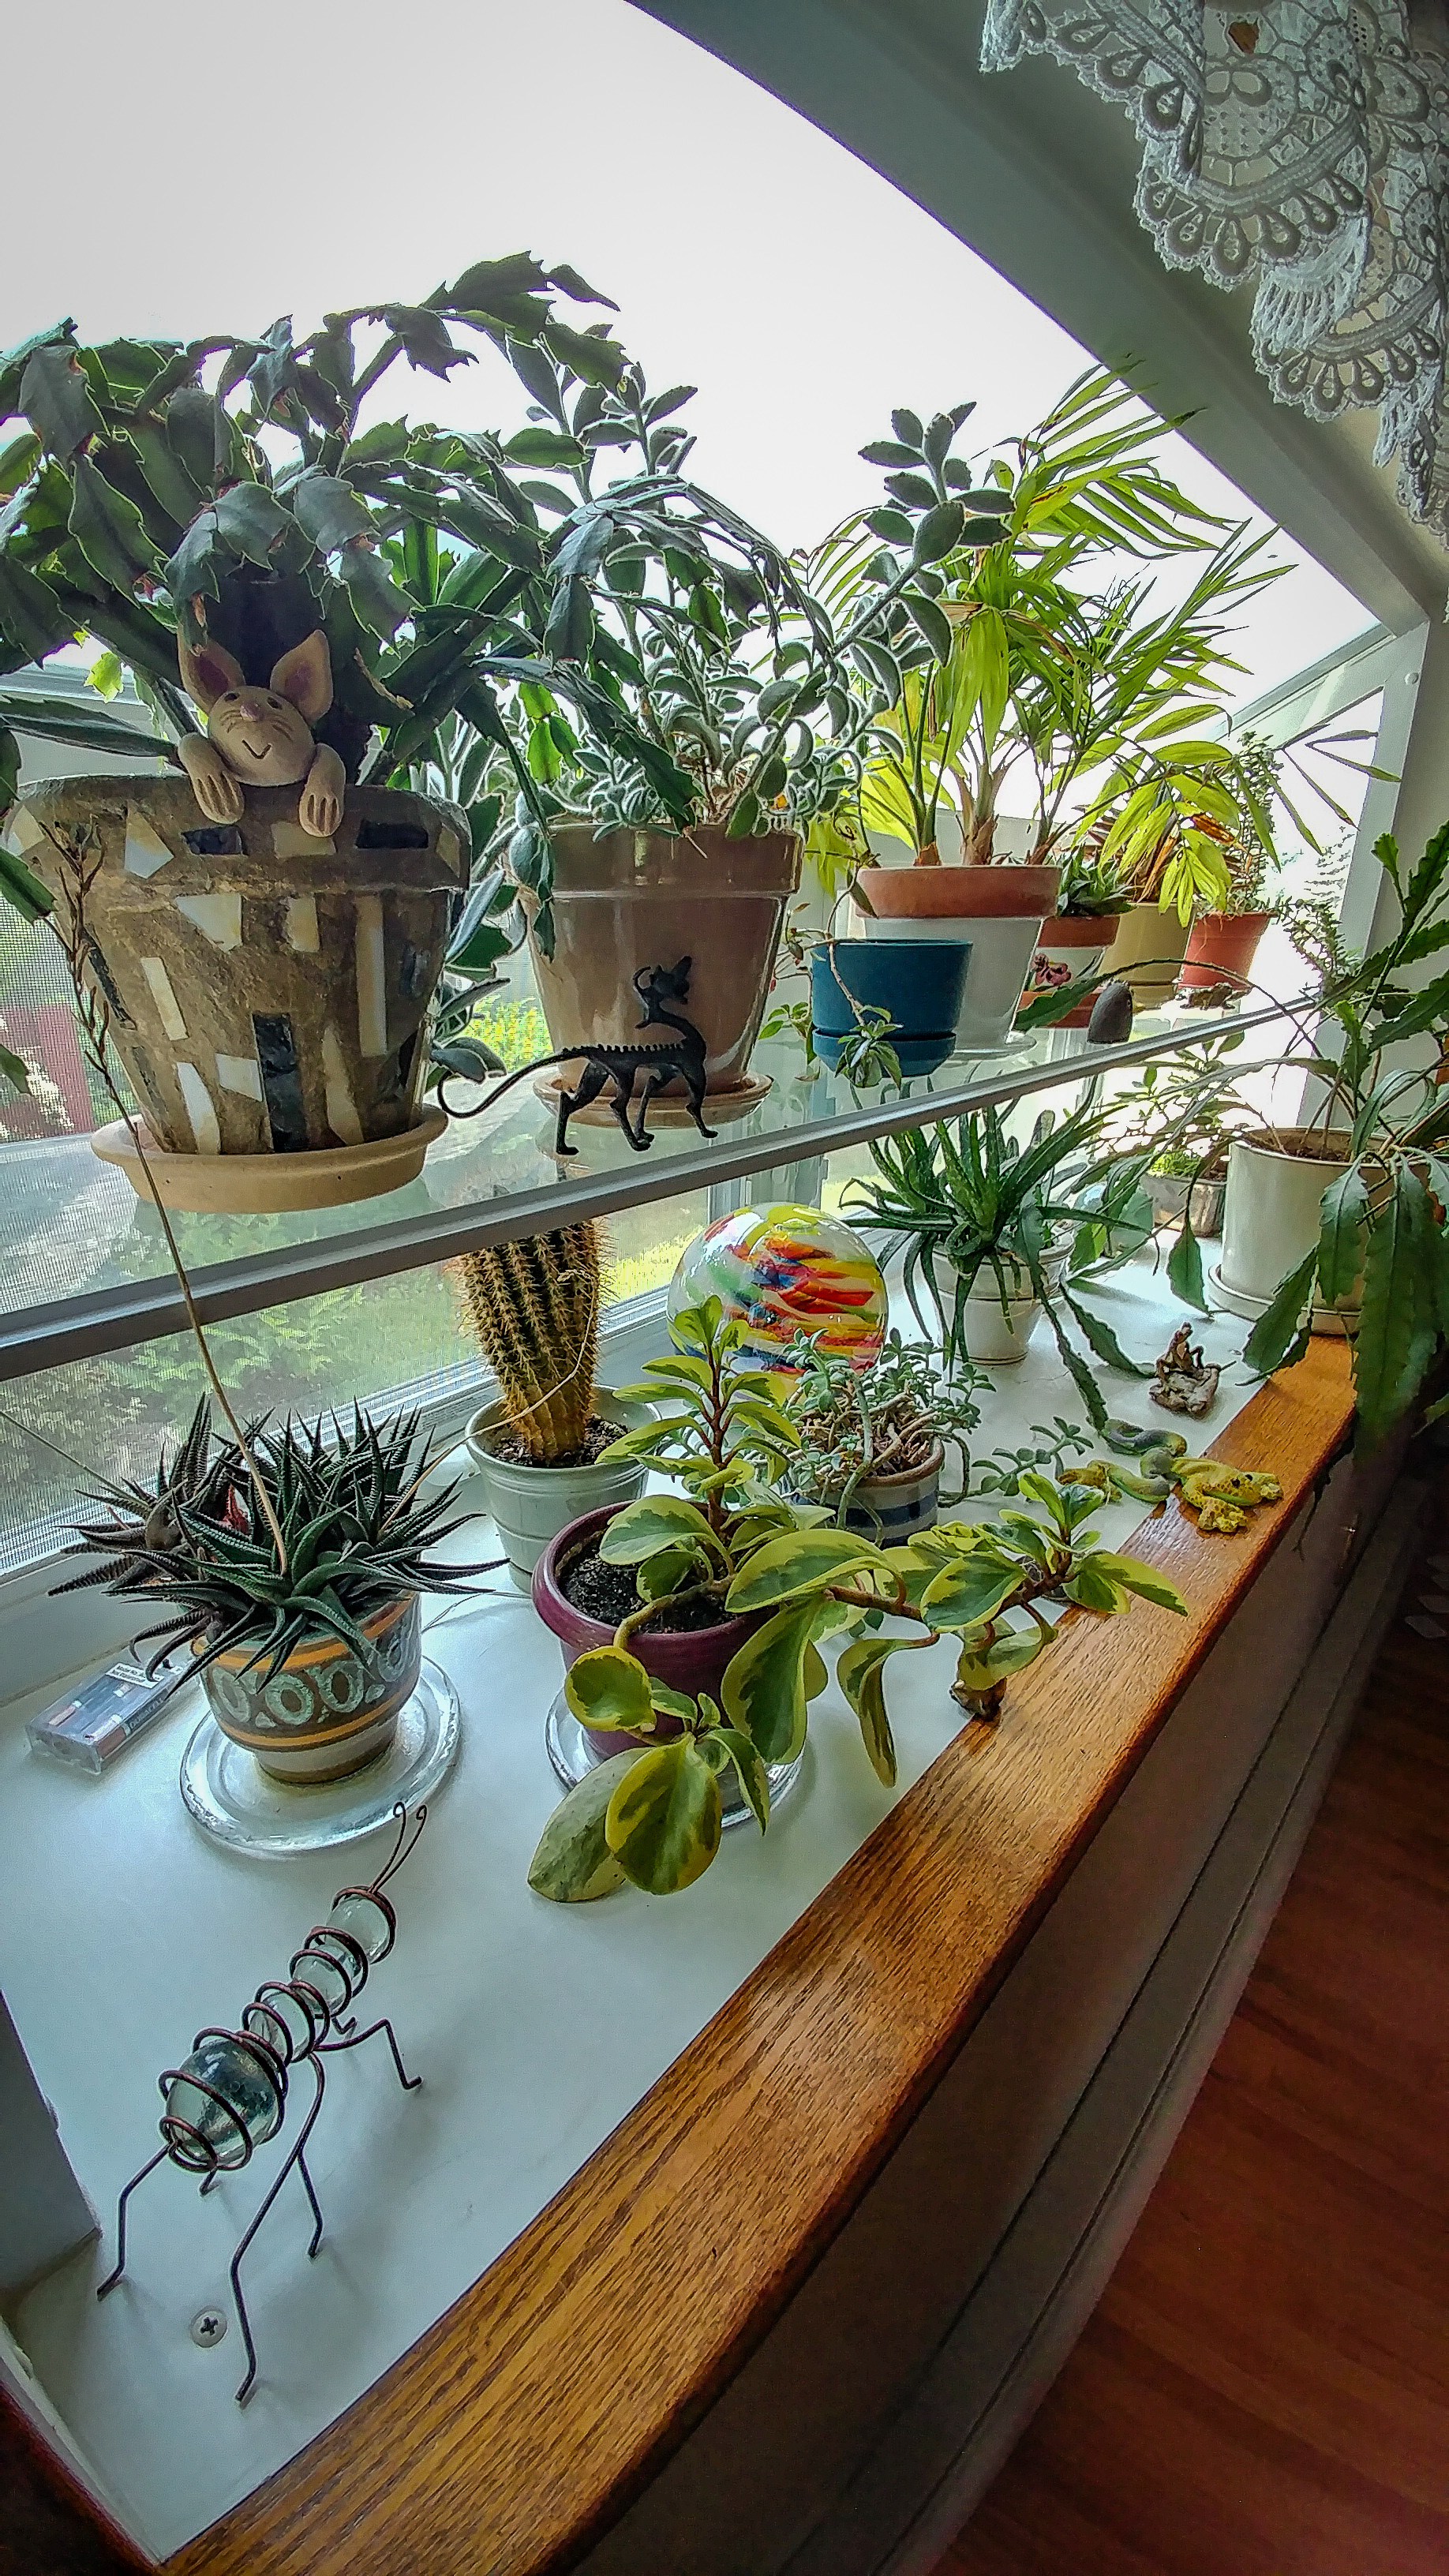 Garden window with a variety of houseplants